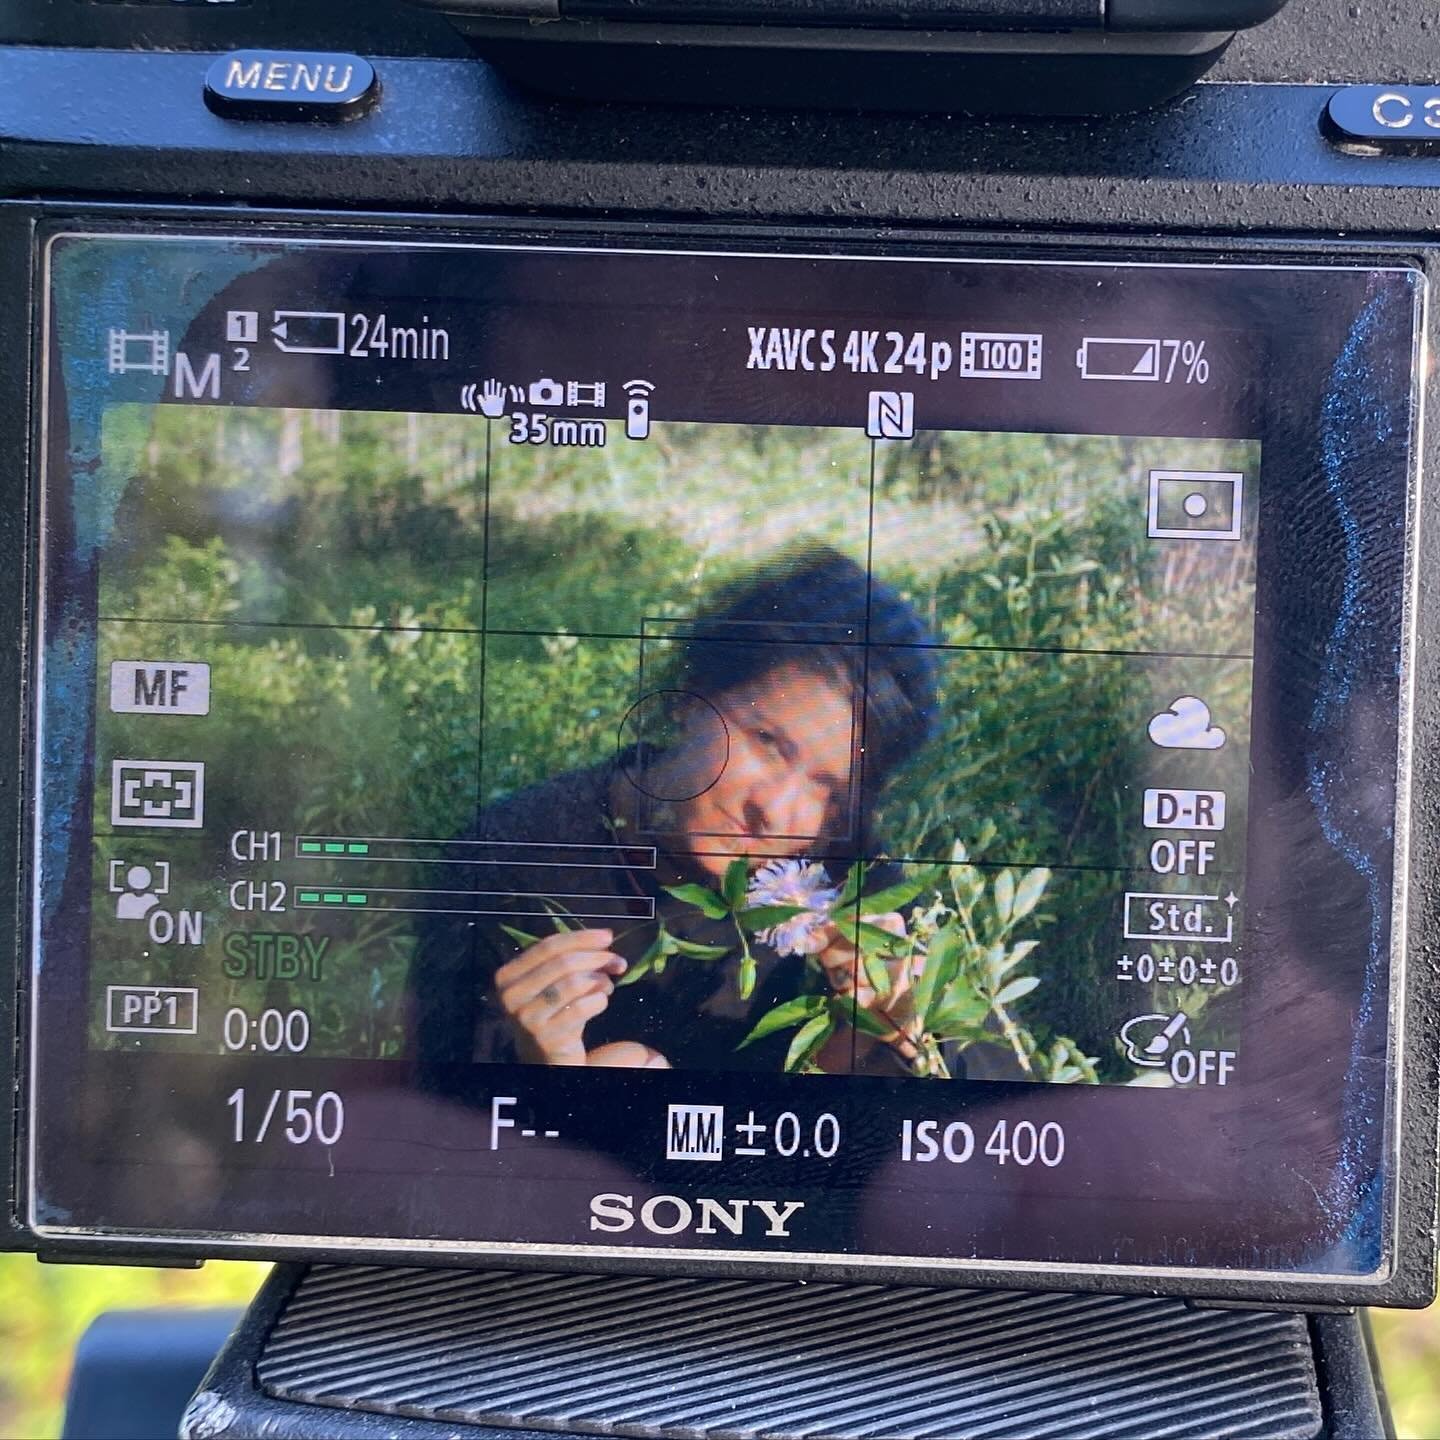 Did you know that with our mini course you get a plant walk video with @theyspeakdoyoulisten ? 

What you get when you sign up:

🌿 A plant walk video with LeAnn 
🌿 A Maypop Materia Medica ( a PDF of information all about the plant) 
🌿 At the end o